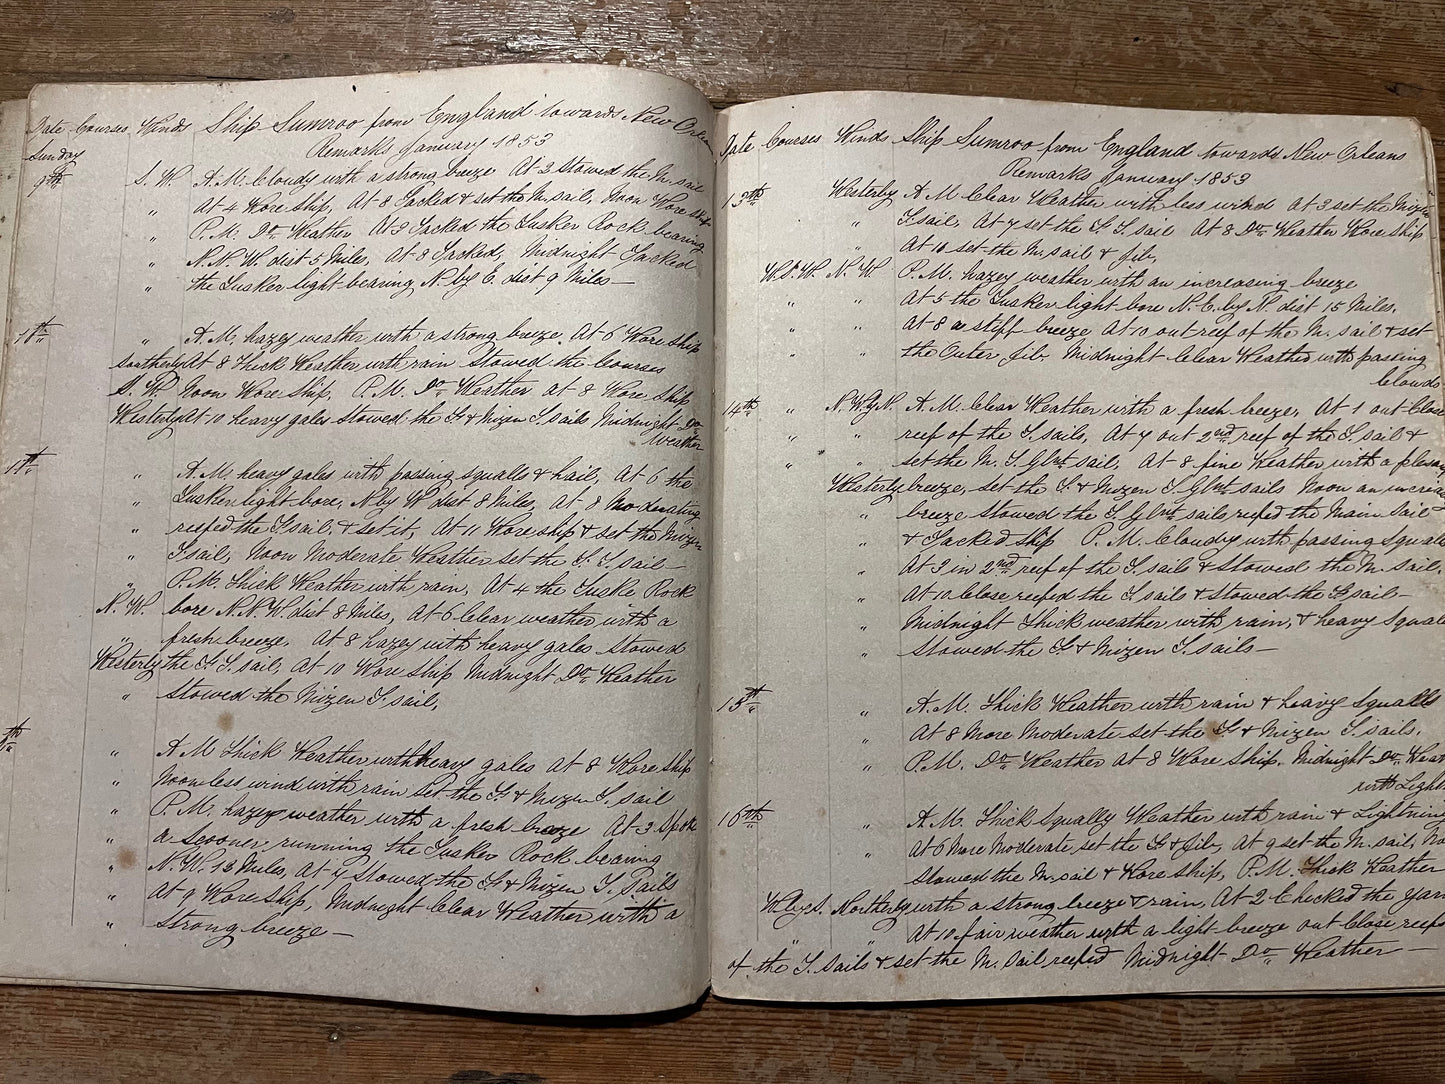 Journal and ships log written by the Liverpool seaman, John Gould, from 1852 to 1868. Includes voyages to New Orleans and San Francisco, and a fascinating list of ships seen in Liverpool harbour from 1867-8.